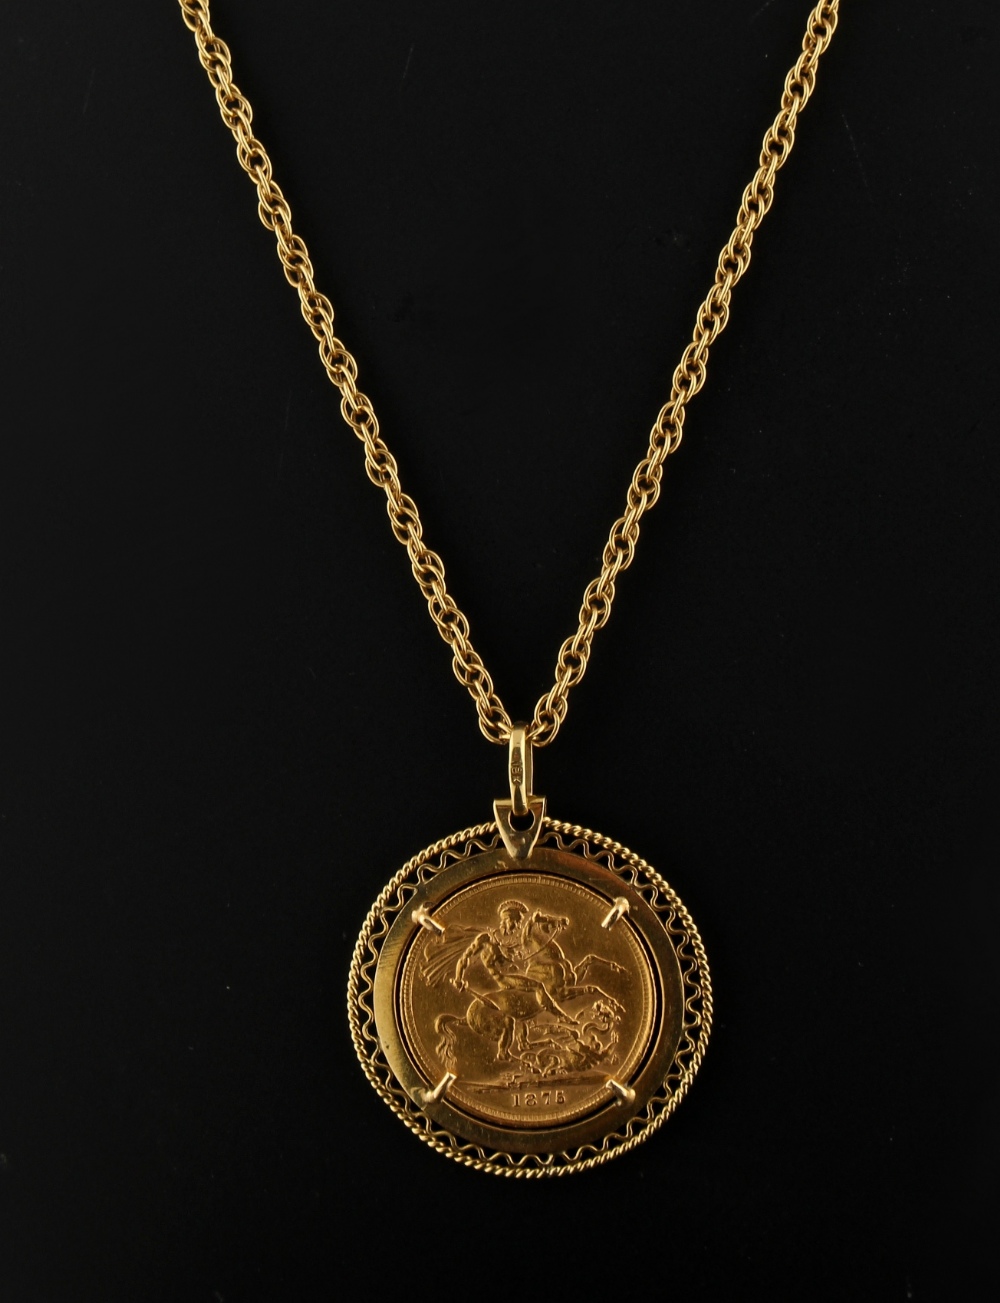 Property of a deceased estate - an 18ct gold mounted full sovereign coin pendant on chain, the - Image 2 of 2